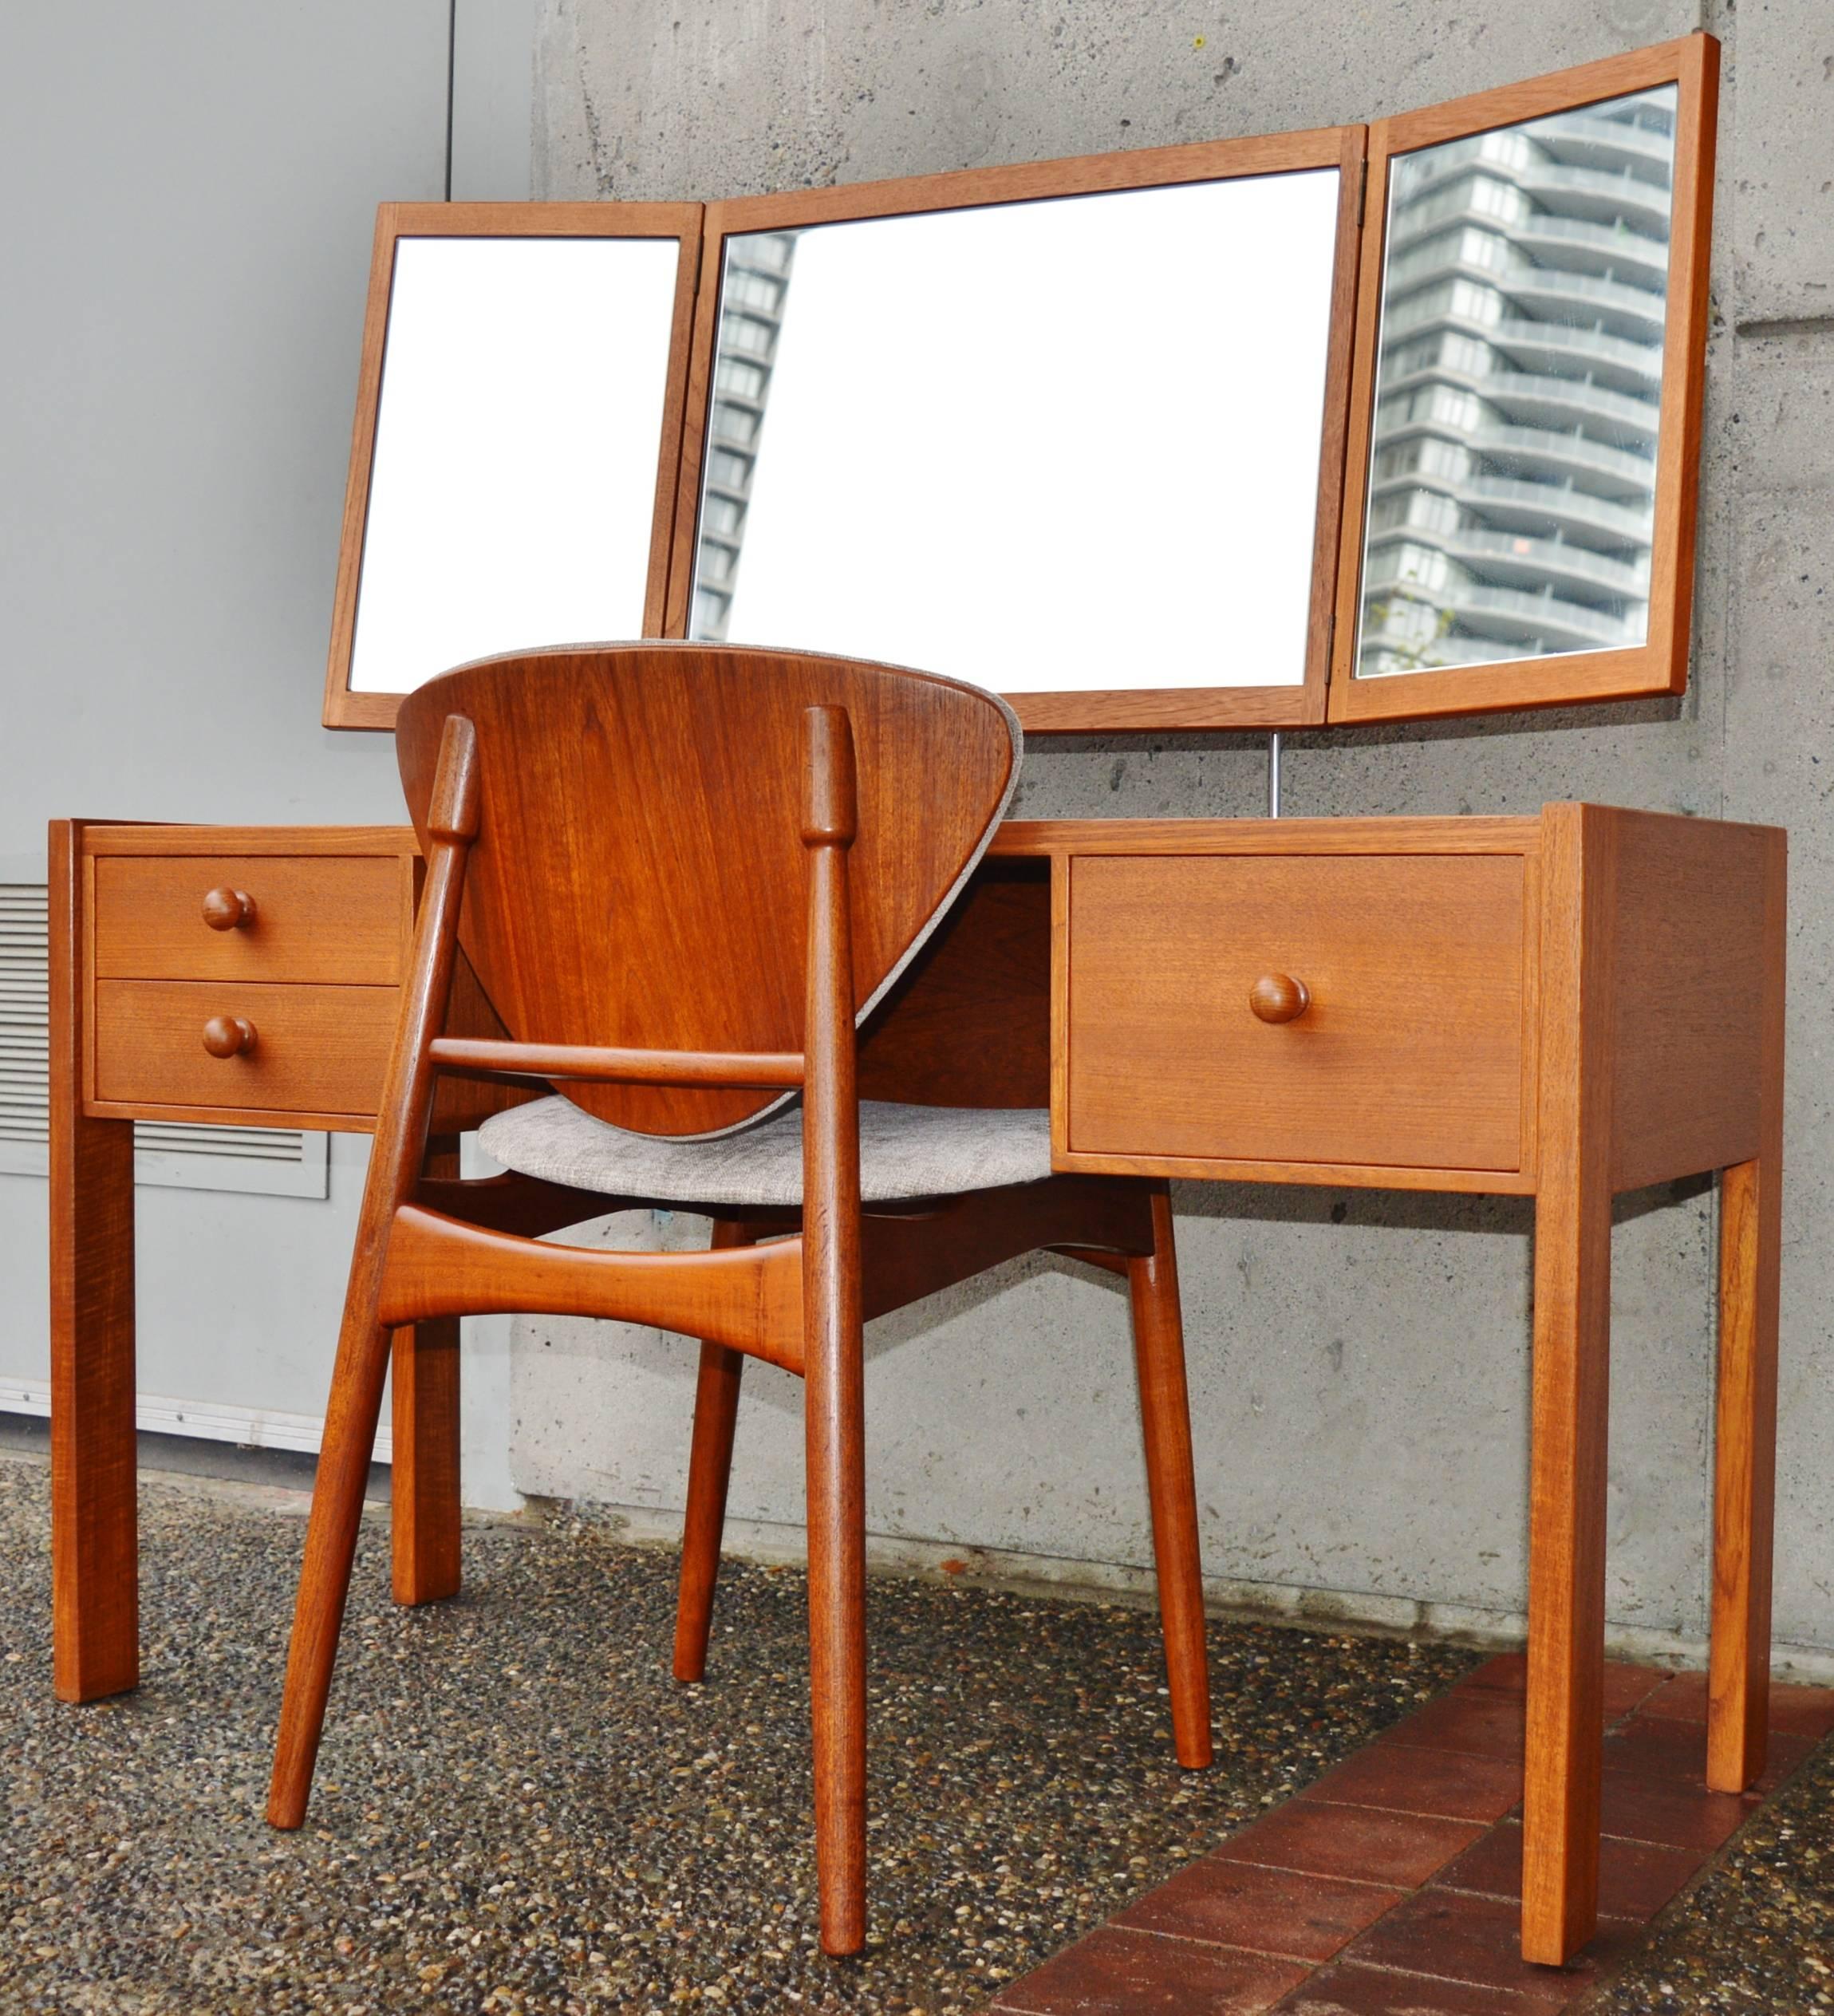 This rare Danish Modern teak architectural vanity was designed by Aksel Kjersgaard for Odder in the 1960s. Featuring quality construction with 3 drawers with birch frame construction and dovetail joins, finished with lovely sculptural teak knobs.